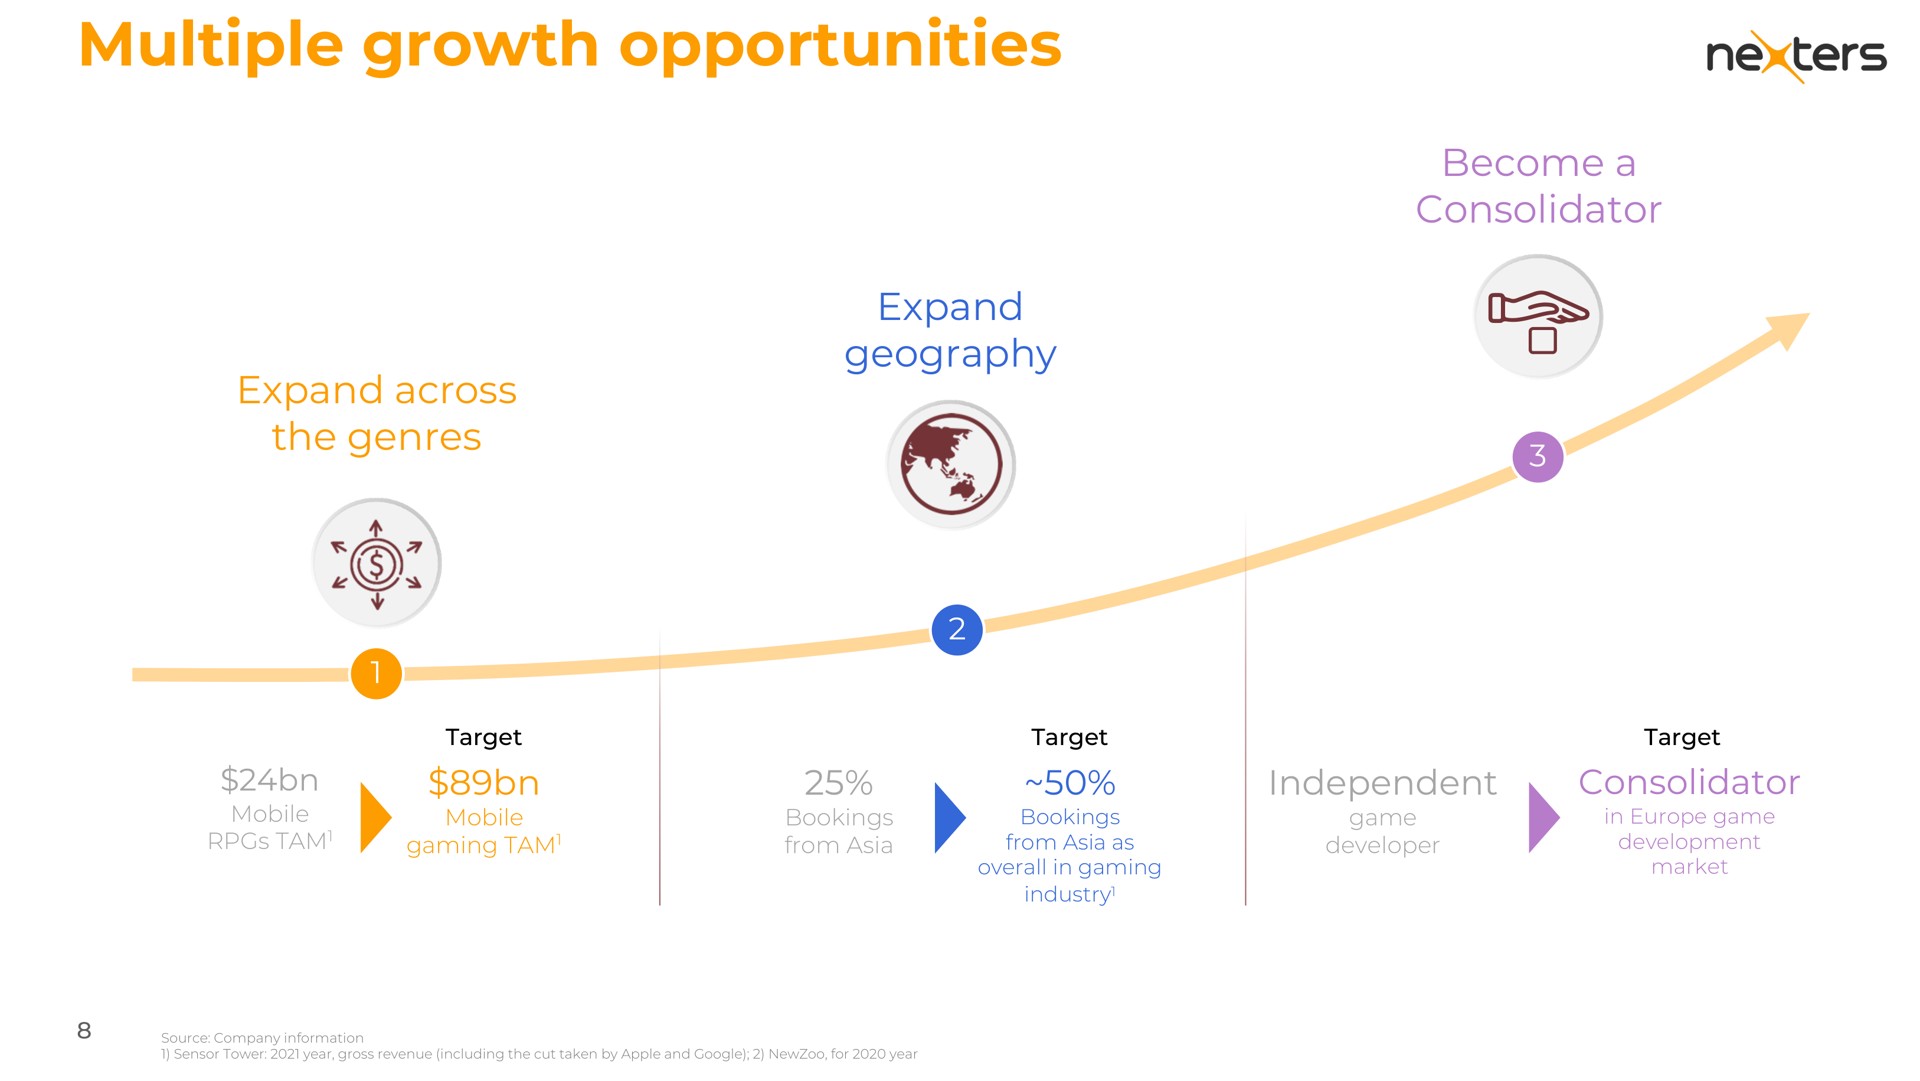 multiple growth opportunities expand across the genres become a consolidator expand geography | Nexters